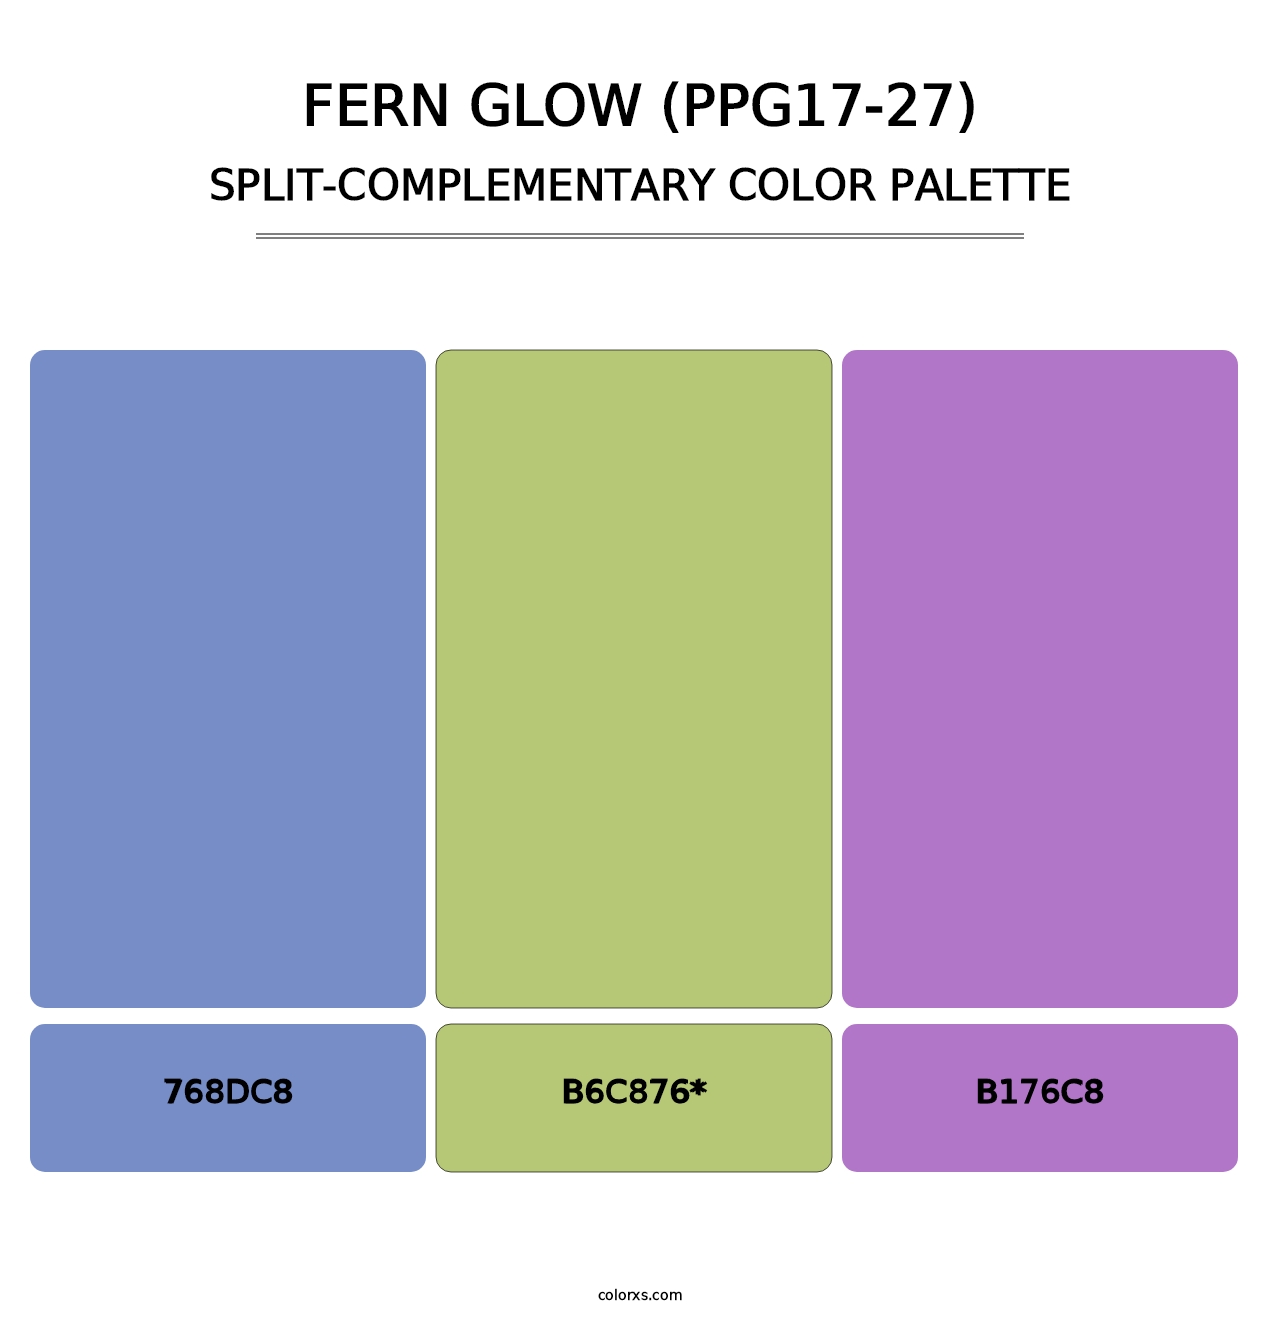 Fern Glow (PPG17-27) - Split-Complementary Color Palette